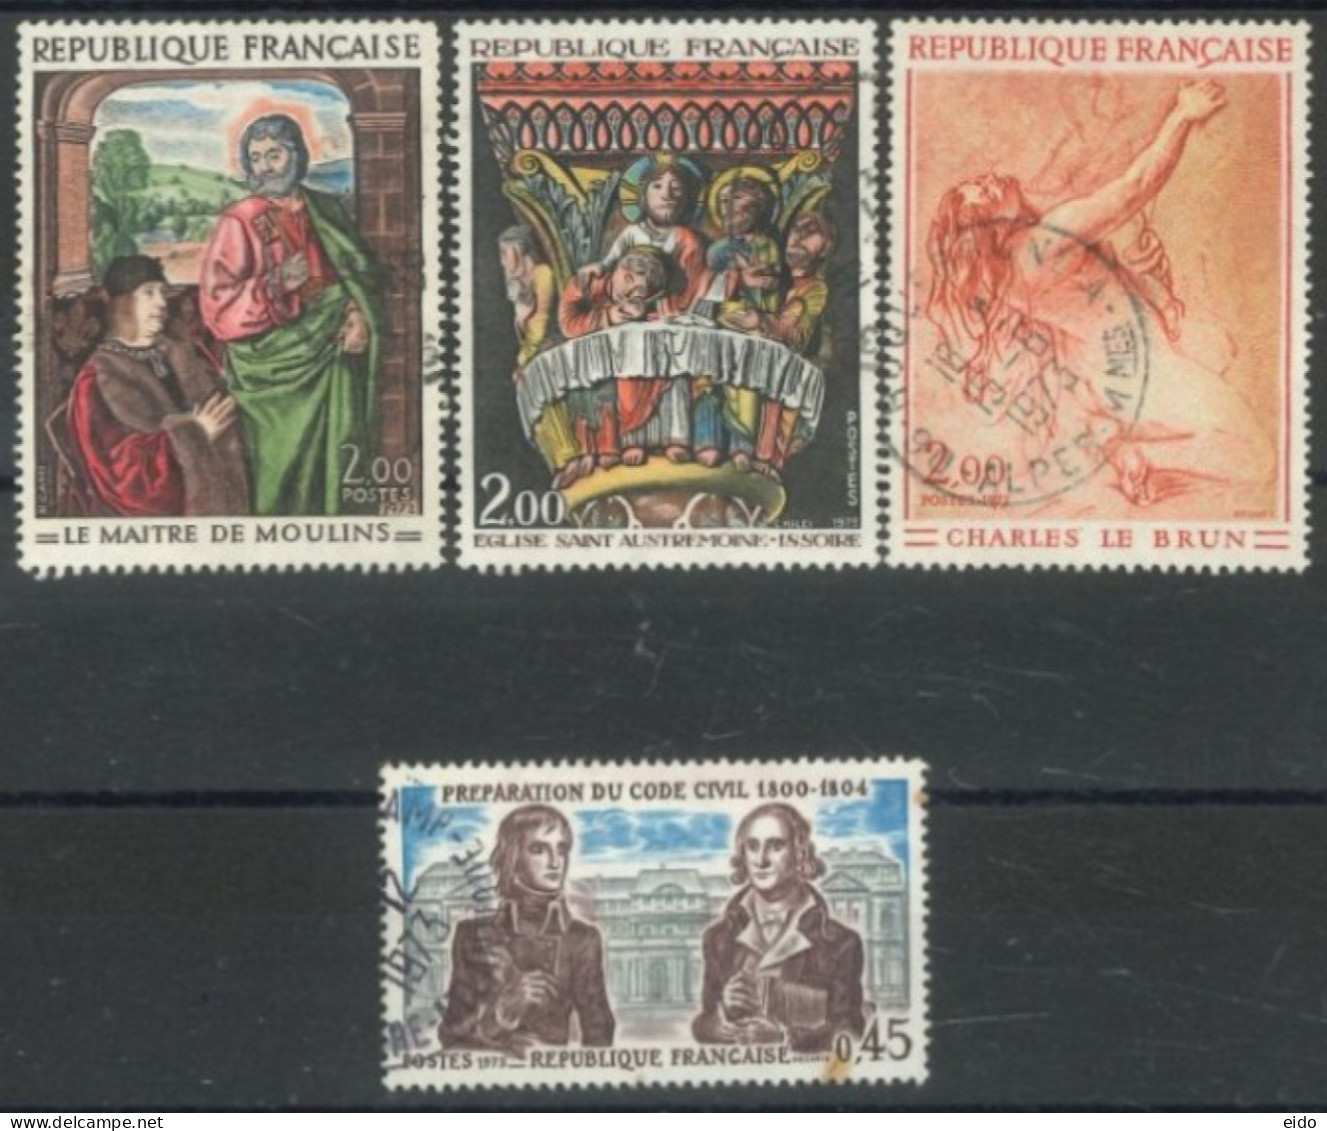 FRANCE - 1972/73, POLYCHROME PAINTINGS & HISTORY OF FRANCE STAMPS SET OF 4,  USED - Oblitérés